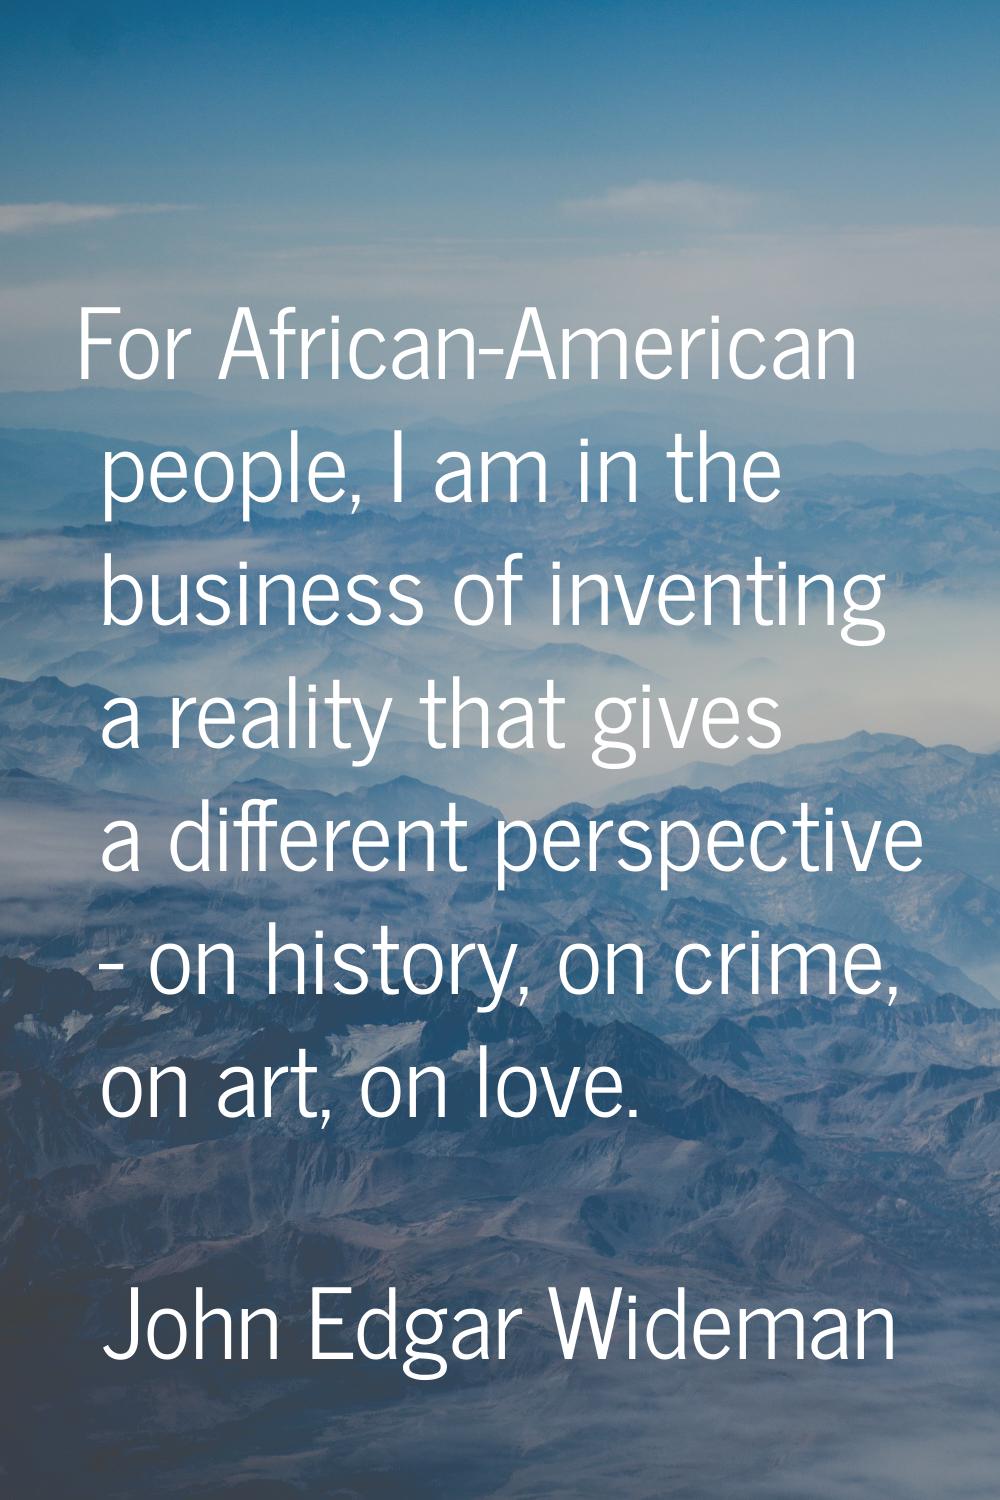 For African-American people, I am in the business of inventing a reality that gives a different per